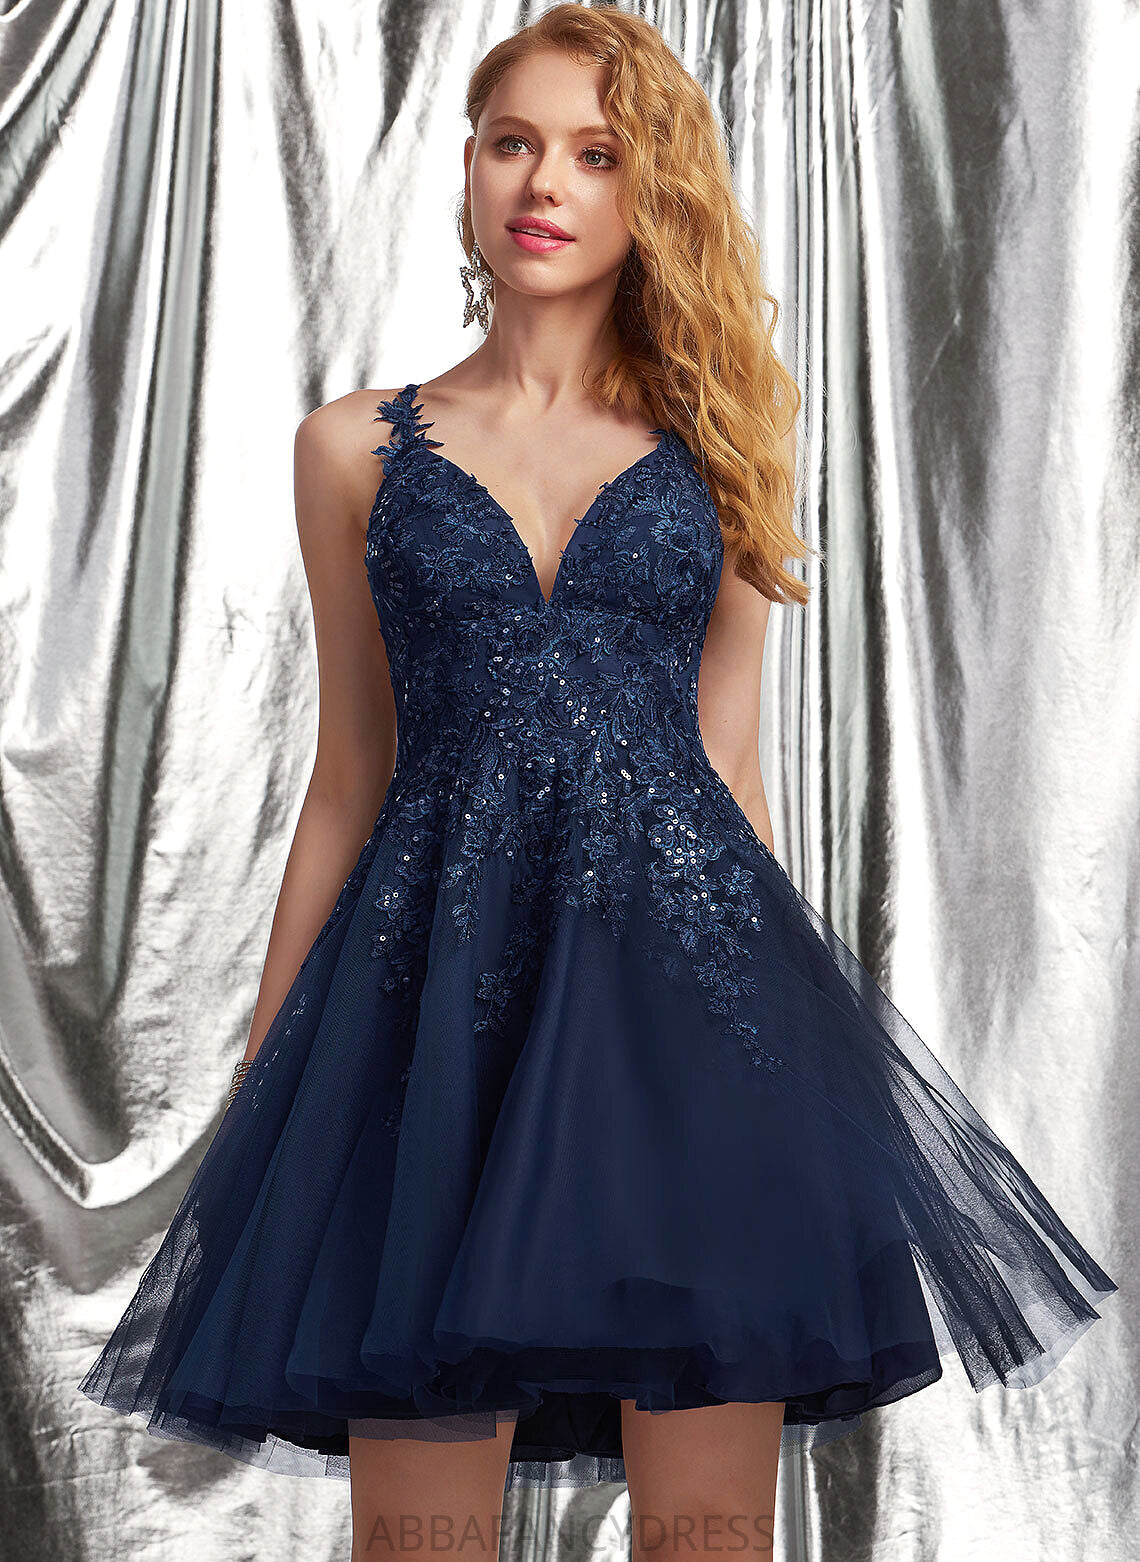 Sequins Tulle Short/Mini Prom Dresses A-Line Eleanor With V-neck Lace